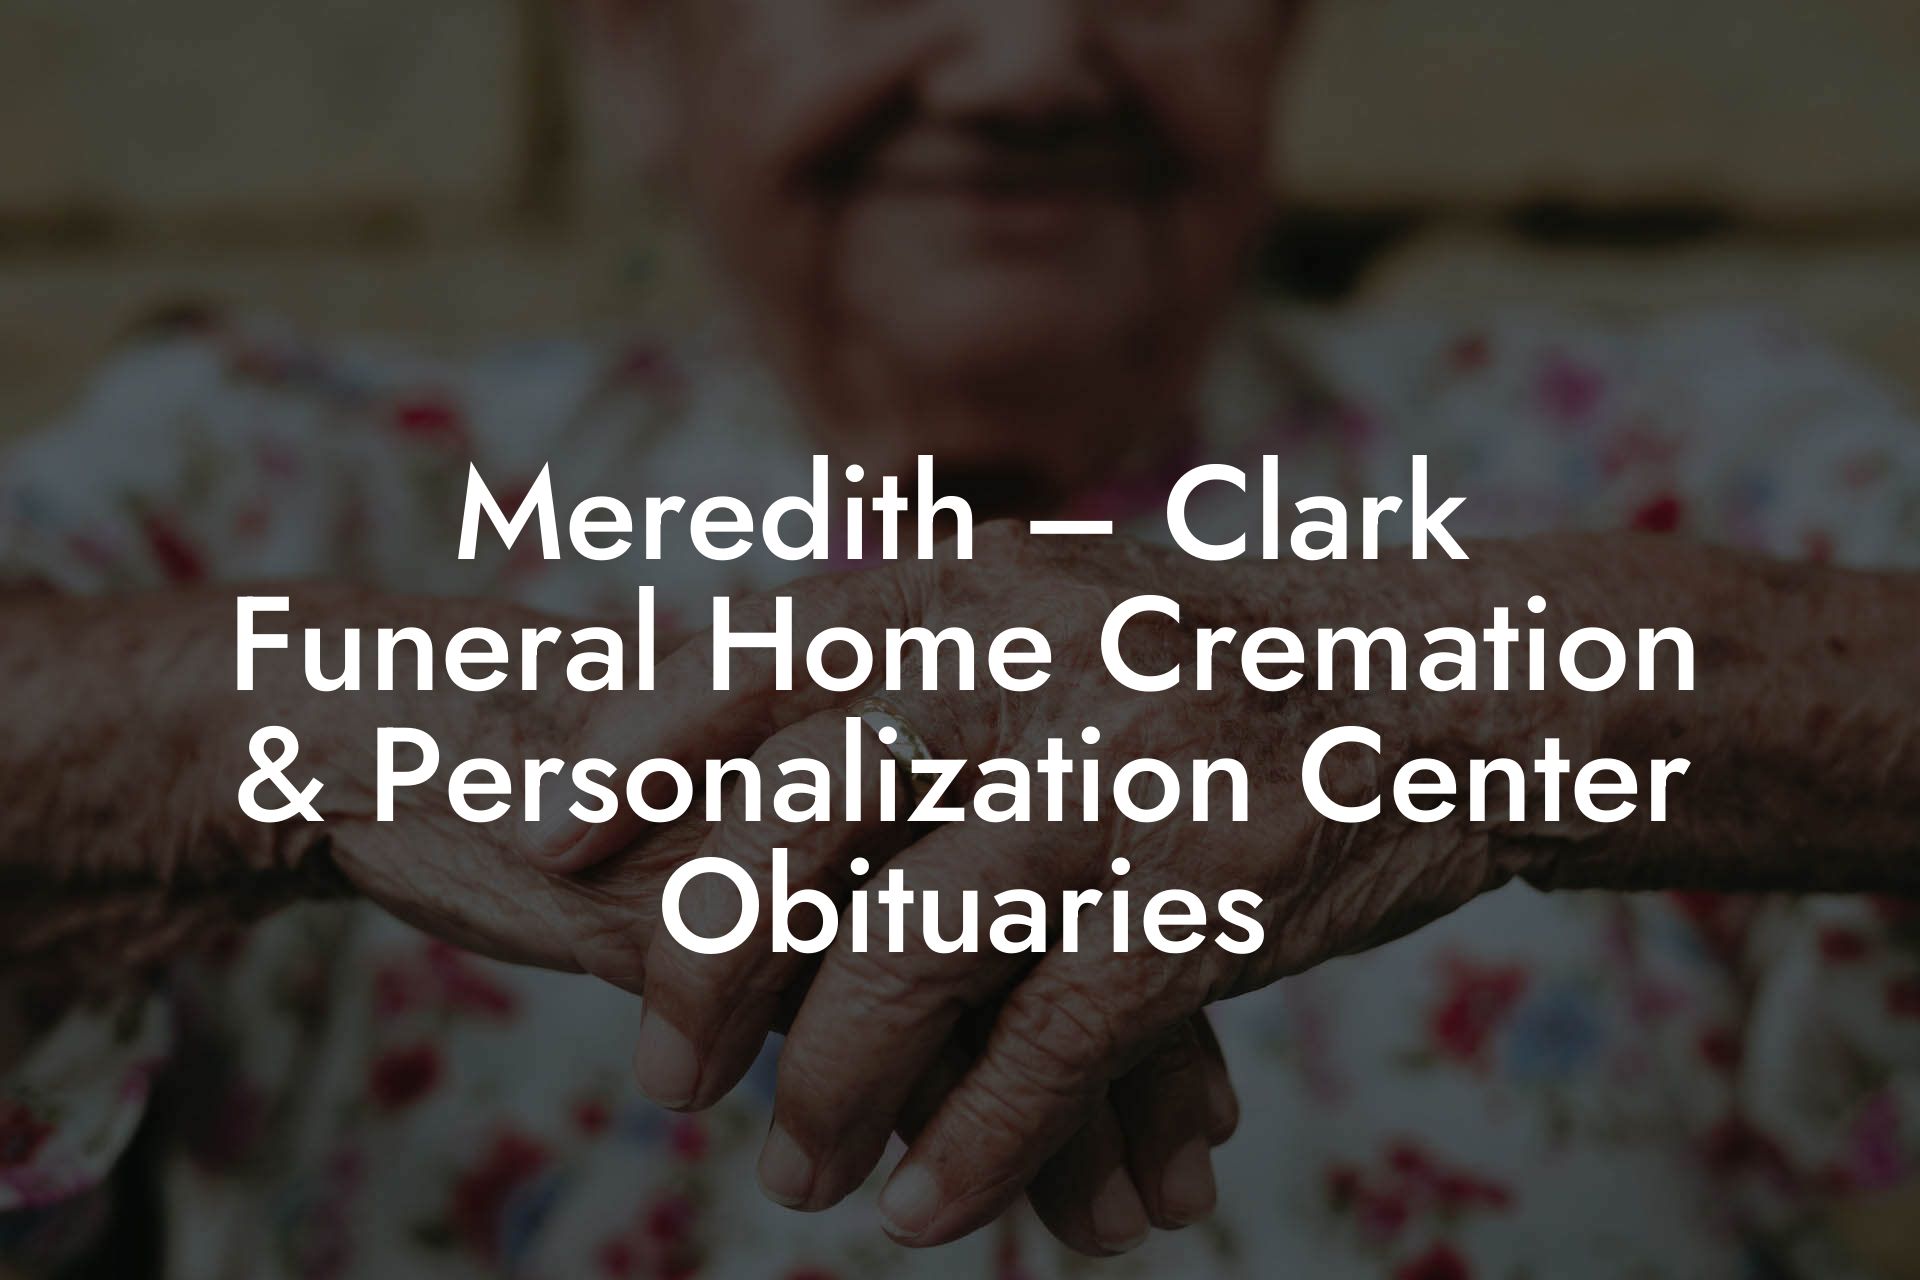 Meredith – Clark Funeral Home Cremation & Personalization Center Obituaries